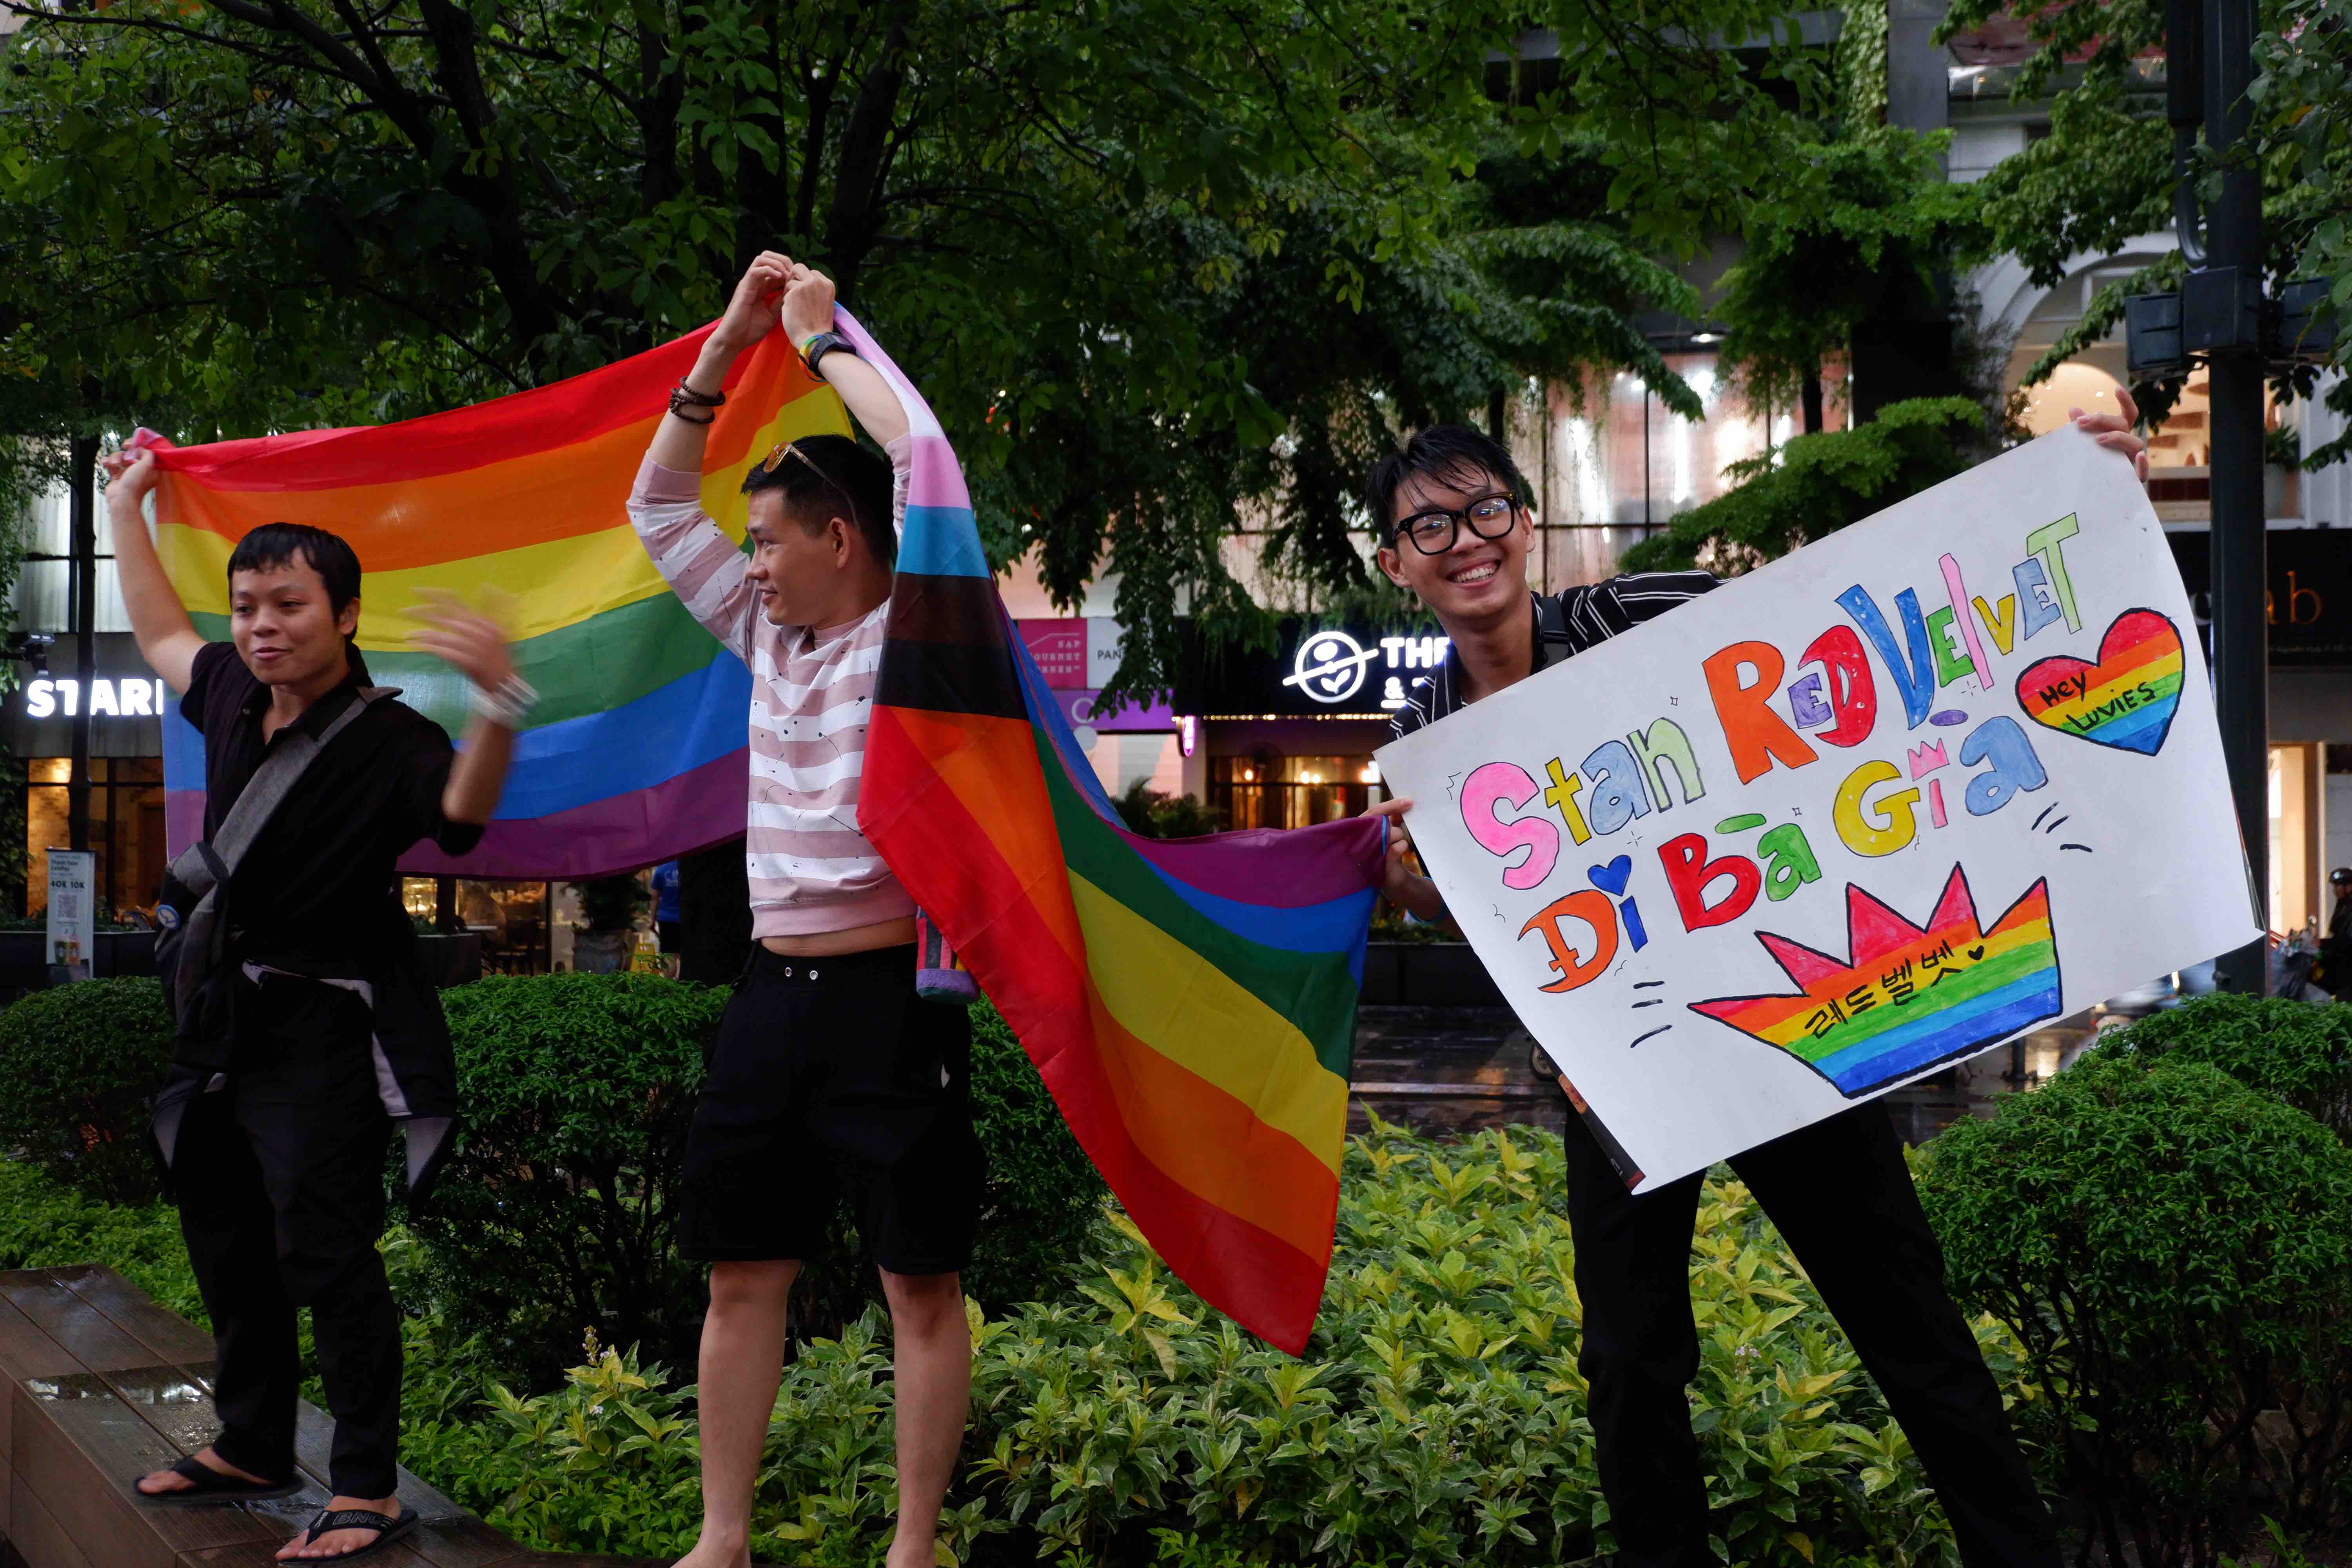 Participants hold flags and banner to show support for freedom and equality LGBT community during the VietPride parade in Ho Chi Minh City on October 1, 2022. Photo: Linh To / Tuoi Tre News